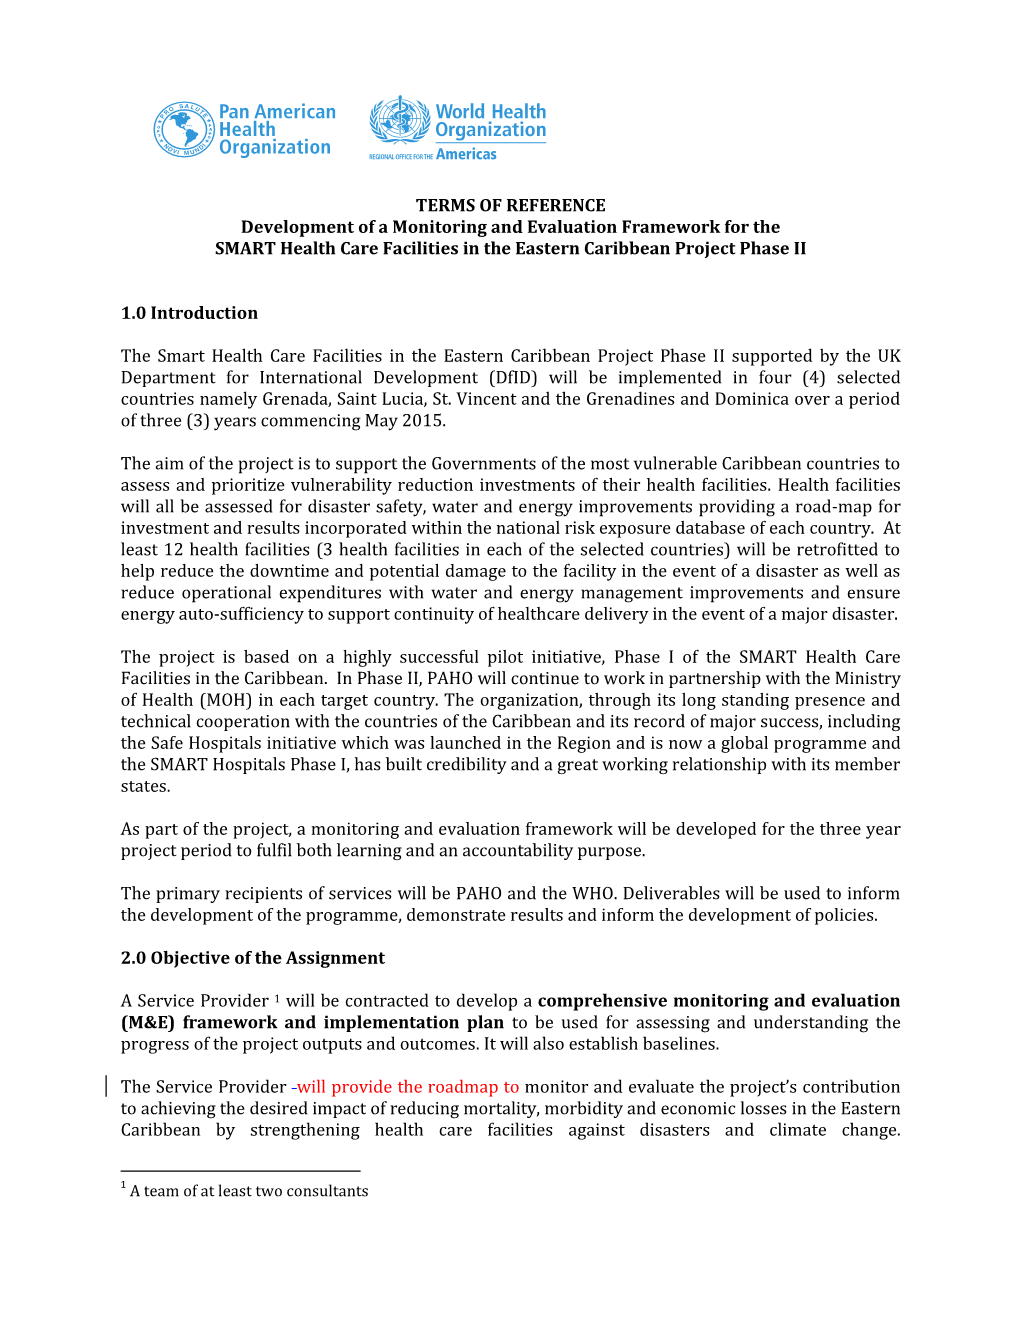 TERMS of REFERENCE Development of a Monitoring and Evaluation Framework for the SMART Health Care Facilities in the Eastern Caribbean Project Phase II